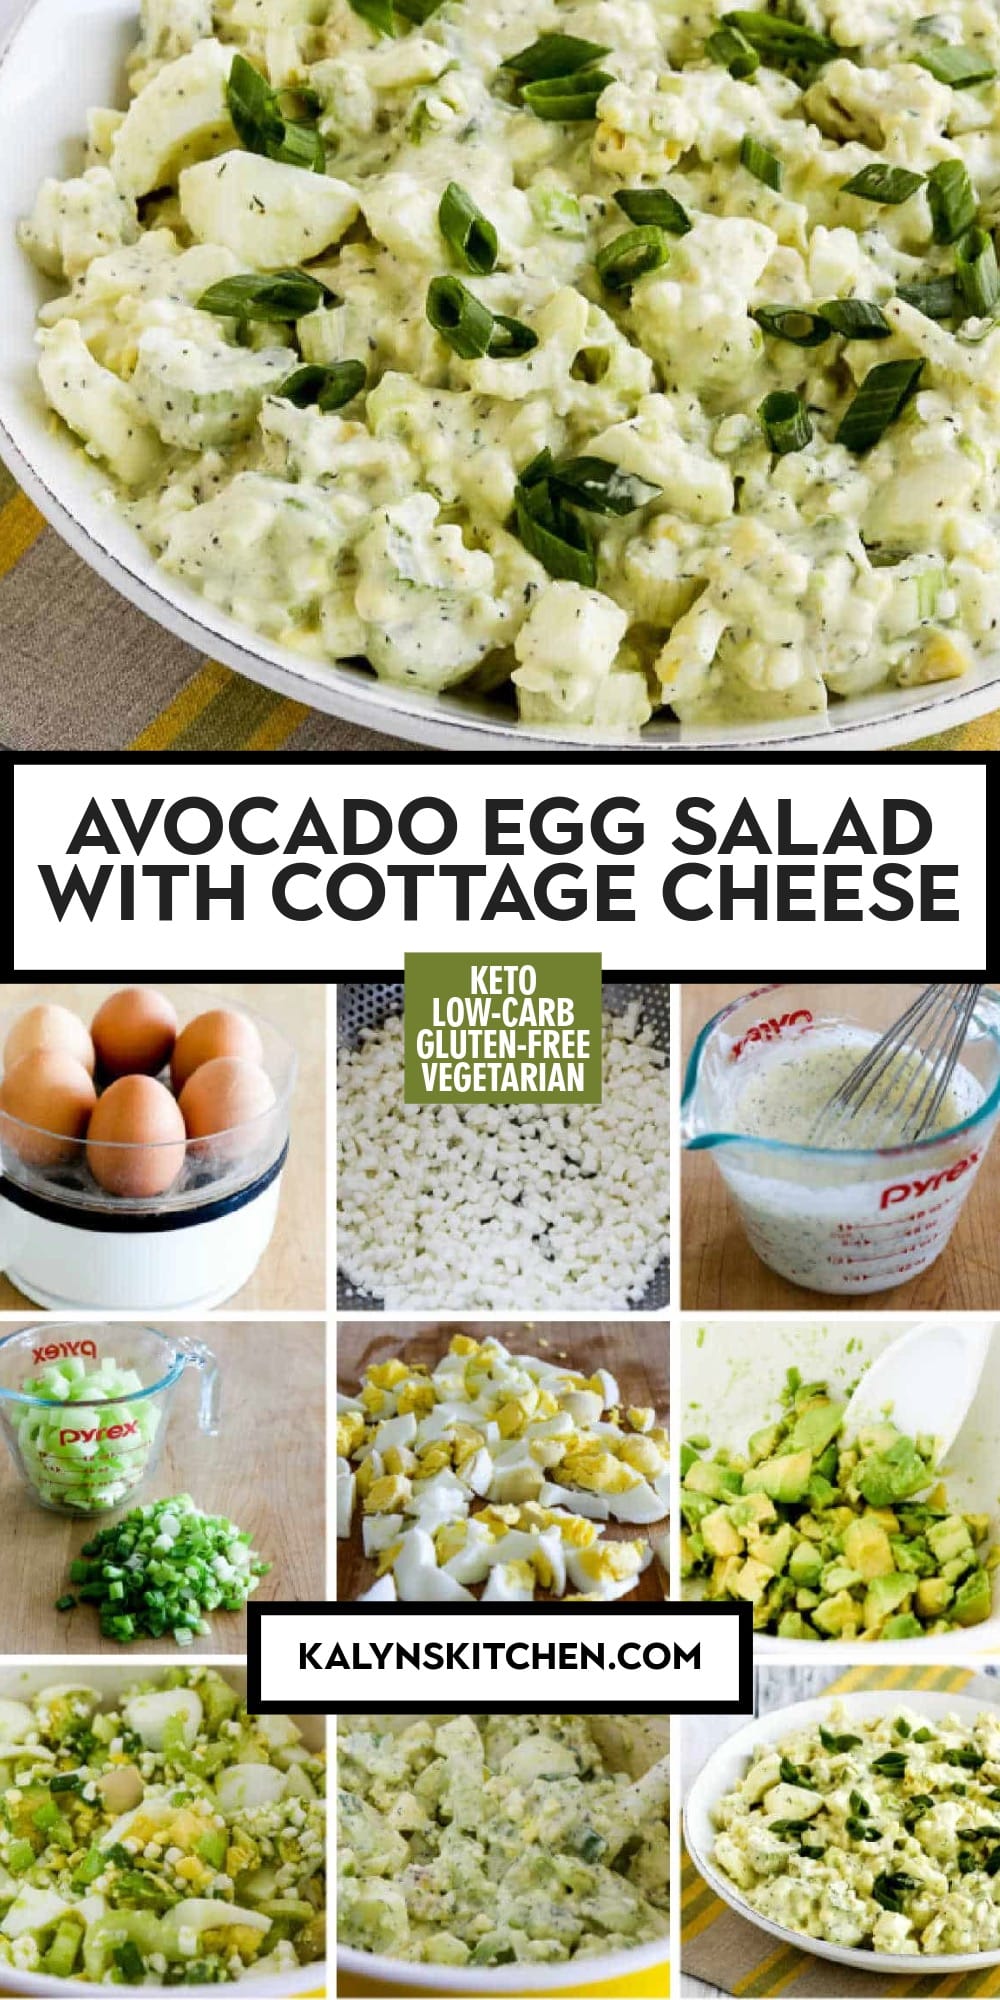 Pinterest image of Avocado Egg Salad with Cottage Cheese